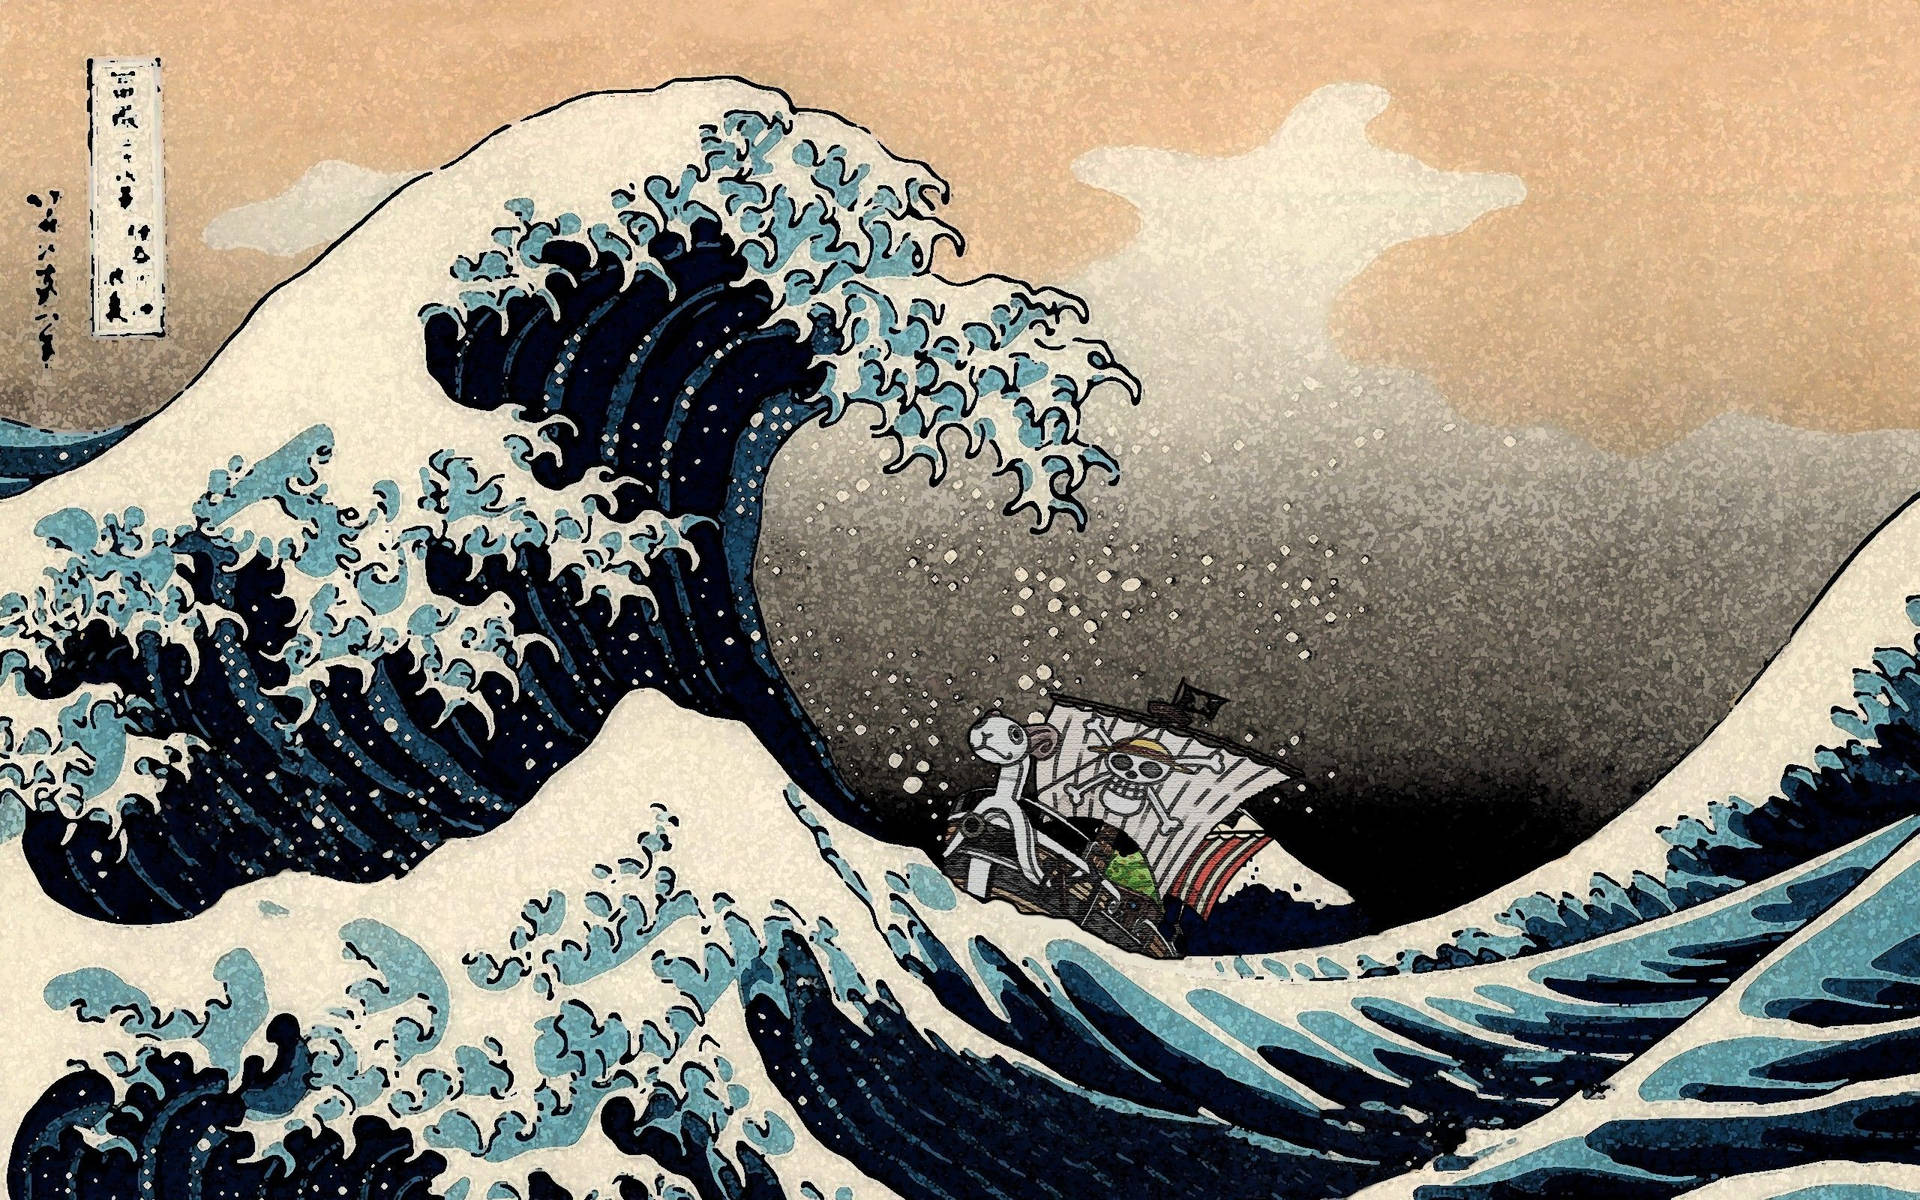 Majestic Japanese Wave Carries The Iconic Going Merry Background